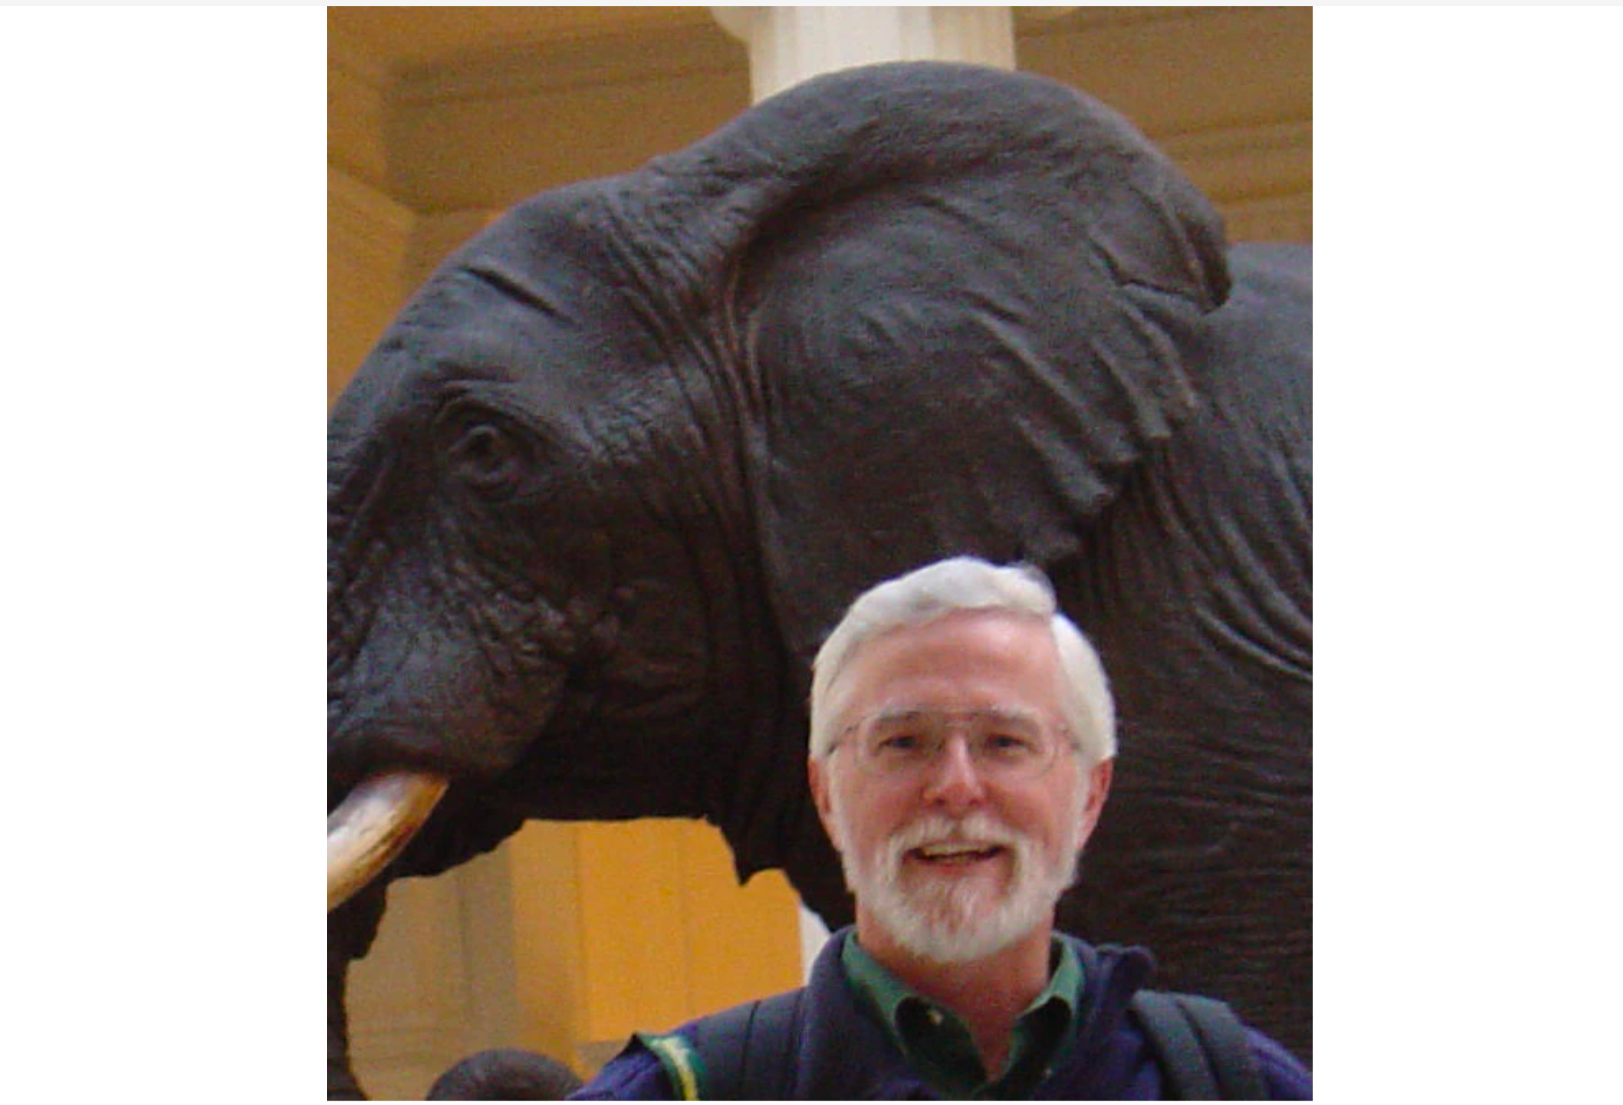 a man in front of a taxidermy elephant